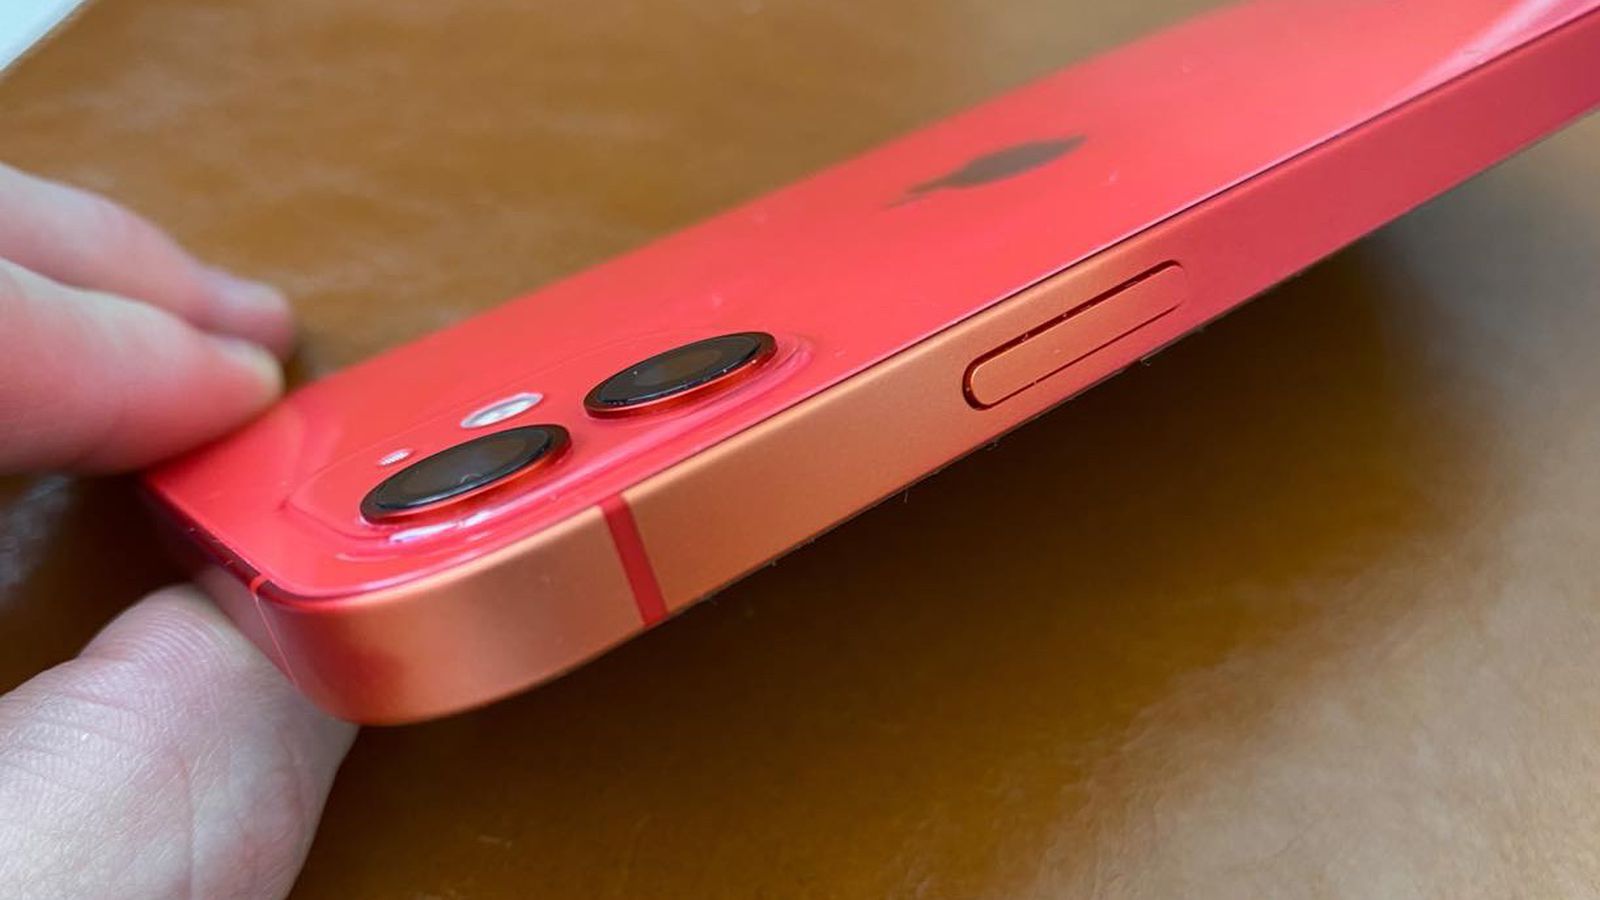 Some iPhone 11 and iPhone 12 models lose color of aluminum